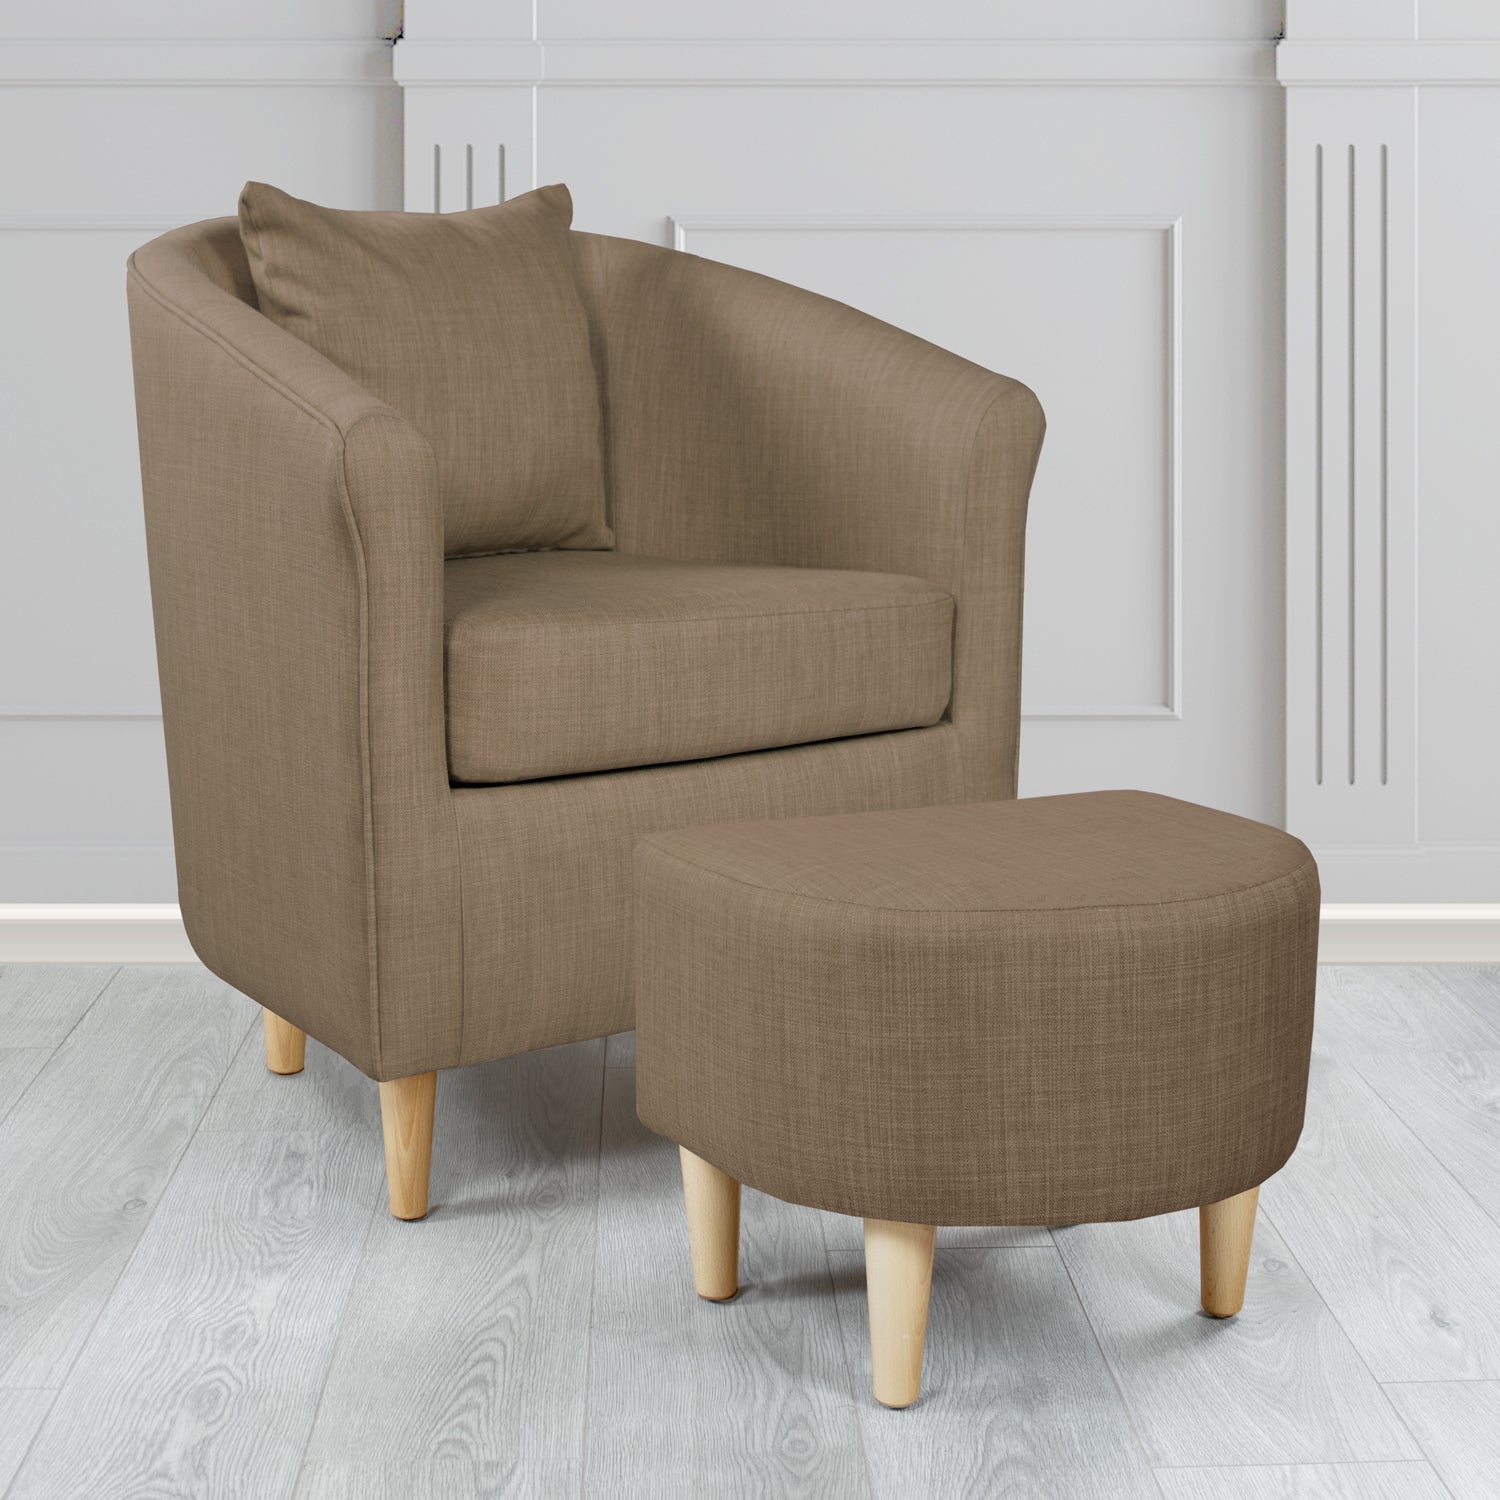 St Tropez Charles Nutmeg Plain Linen Fabric Tub Chair & Footstool Set with Scatter Cushion - The Tub Chair Shop